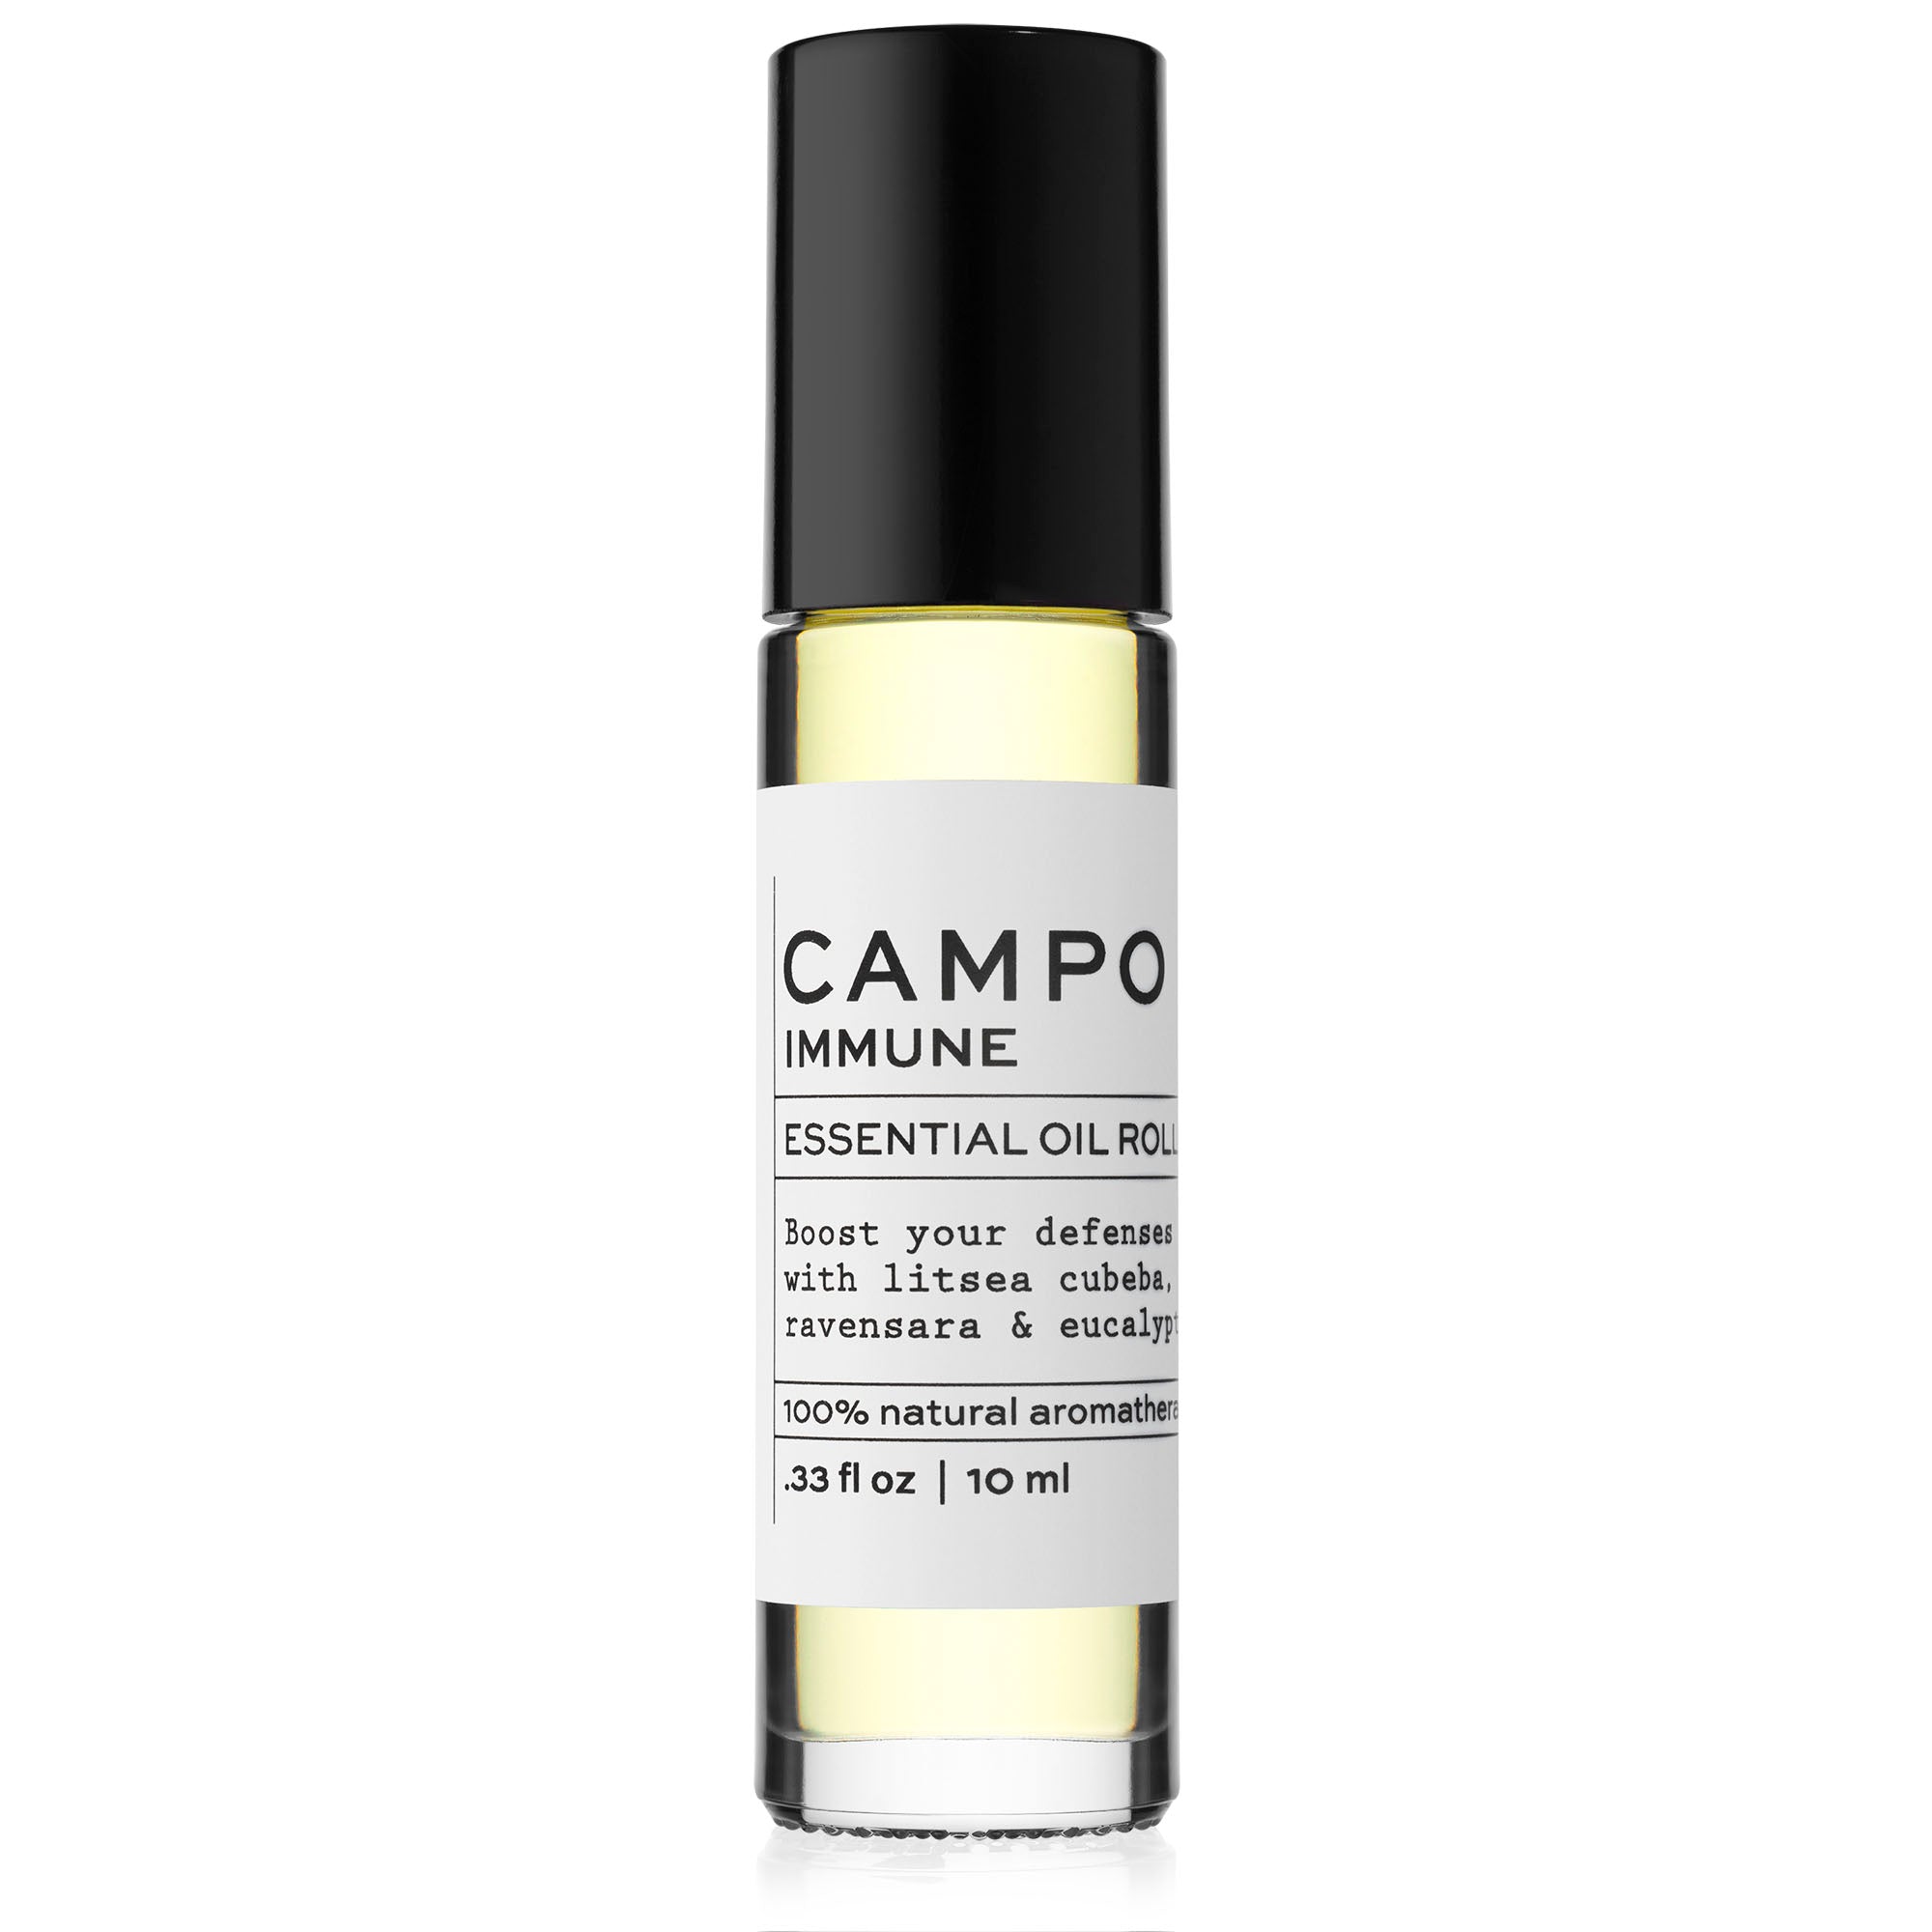 Campo Beauty Essential Oil IMMUNE Blend Roll-On that in 5 ml. Boost your defenses naturally. Help support your body’s natural defenses with this 100% natural essential oil roll-on blend of Litsea Cubeba, Ravensara & Eucalyptus. Pre-blended with 100% natural beauty carrier oils. Jet set and ready to roll.